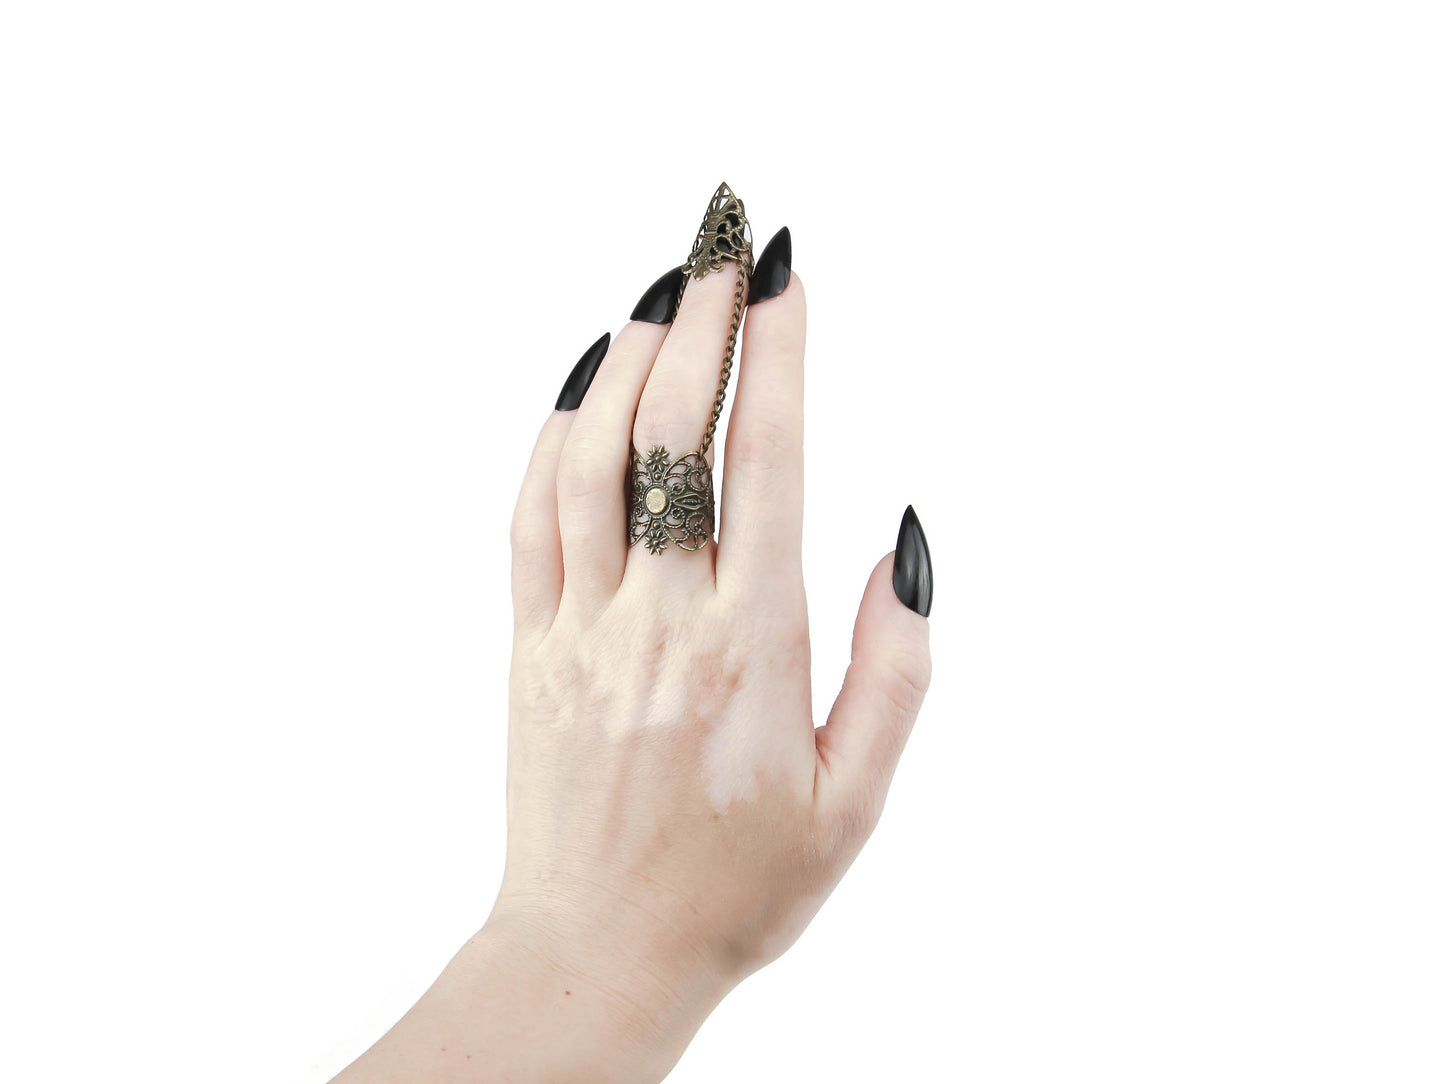 A dramatic bronze claw ring from Myril Jewels adorns the middle finger, embodying the essence of neo-goth style. This dark, avant-garde piece is a perfect expression for Halloween, punk styles, and witchcore enthusiasts, enhancing any gothic-chic or minimal goth ensemble. Ideal for everyday wear, rave parties, and festivals, it's a bold jewelry choice and a thoughtful gift for a goth girlfriend.